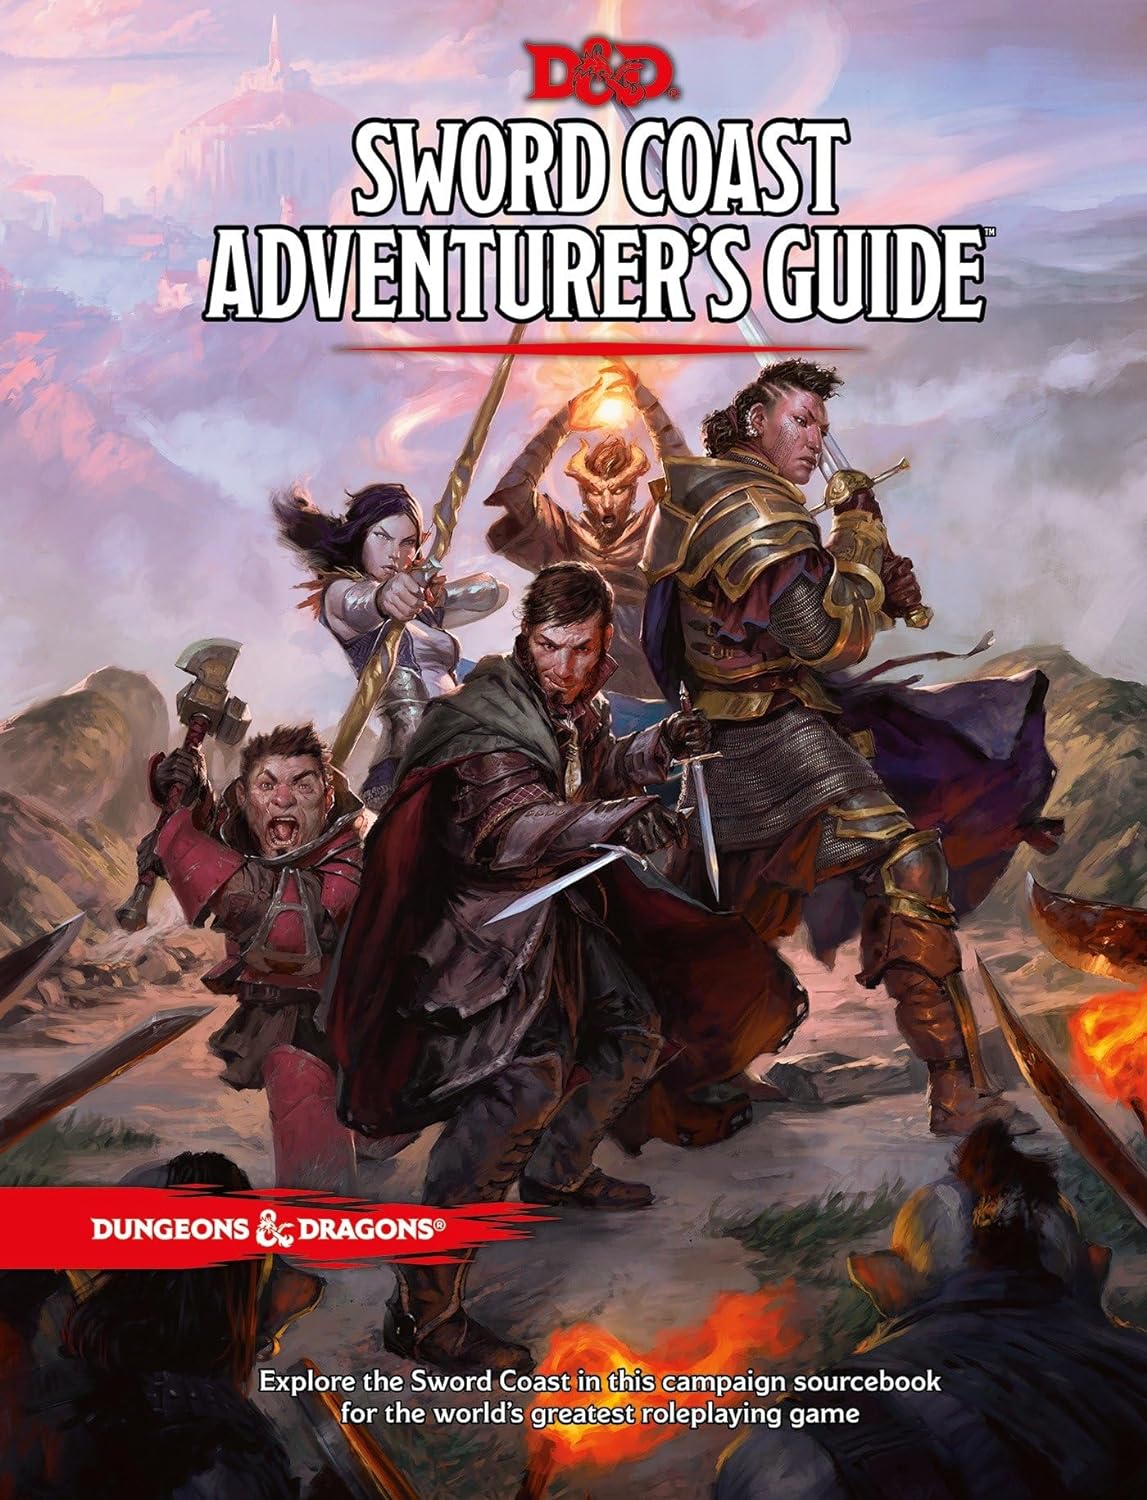 Dungeons & Dragons 5th Edition - Sword Coast Adventurer's Guide